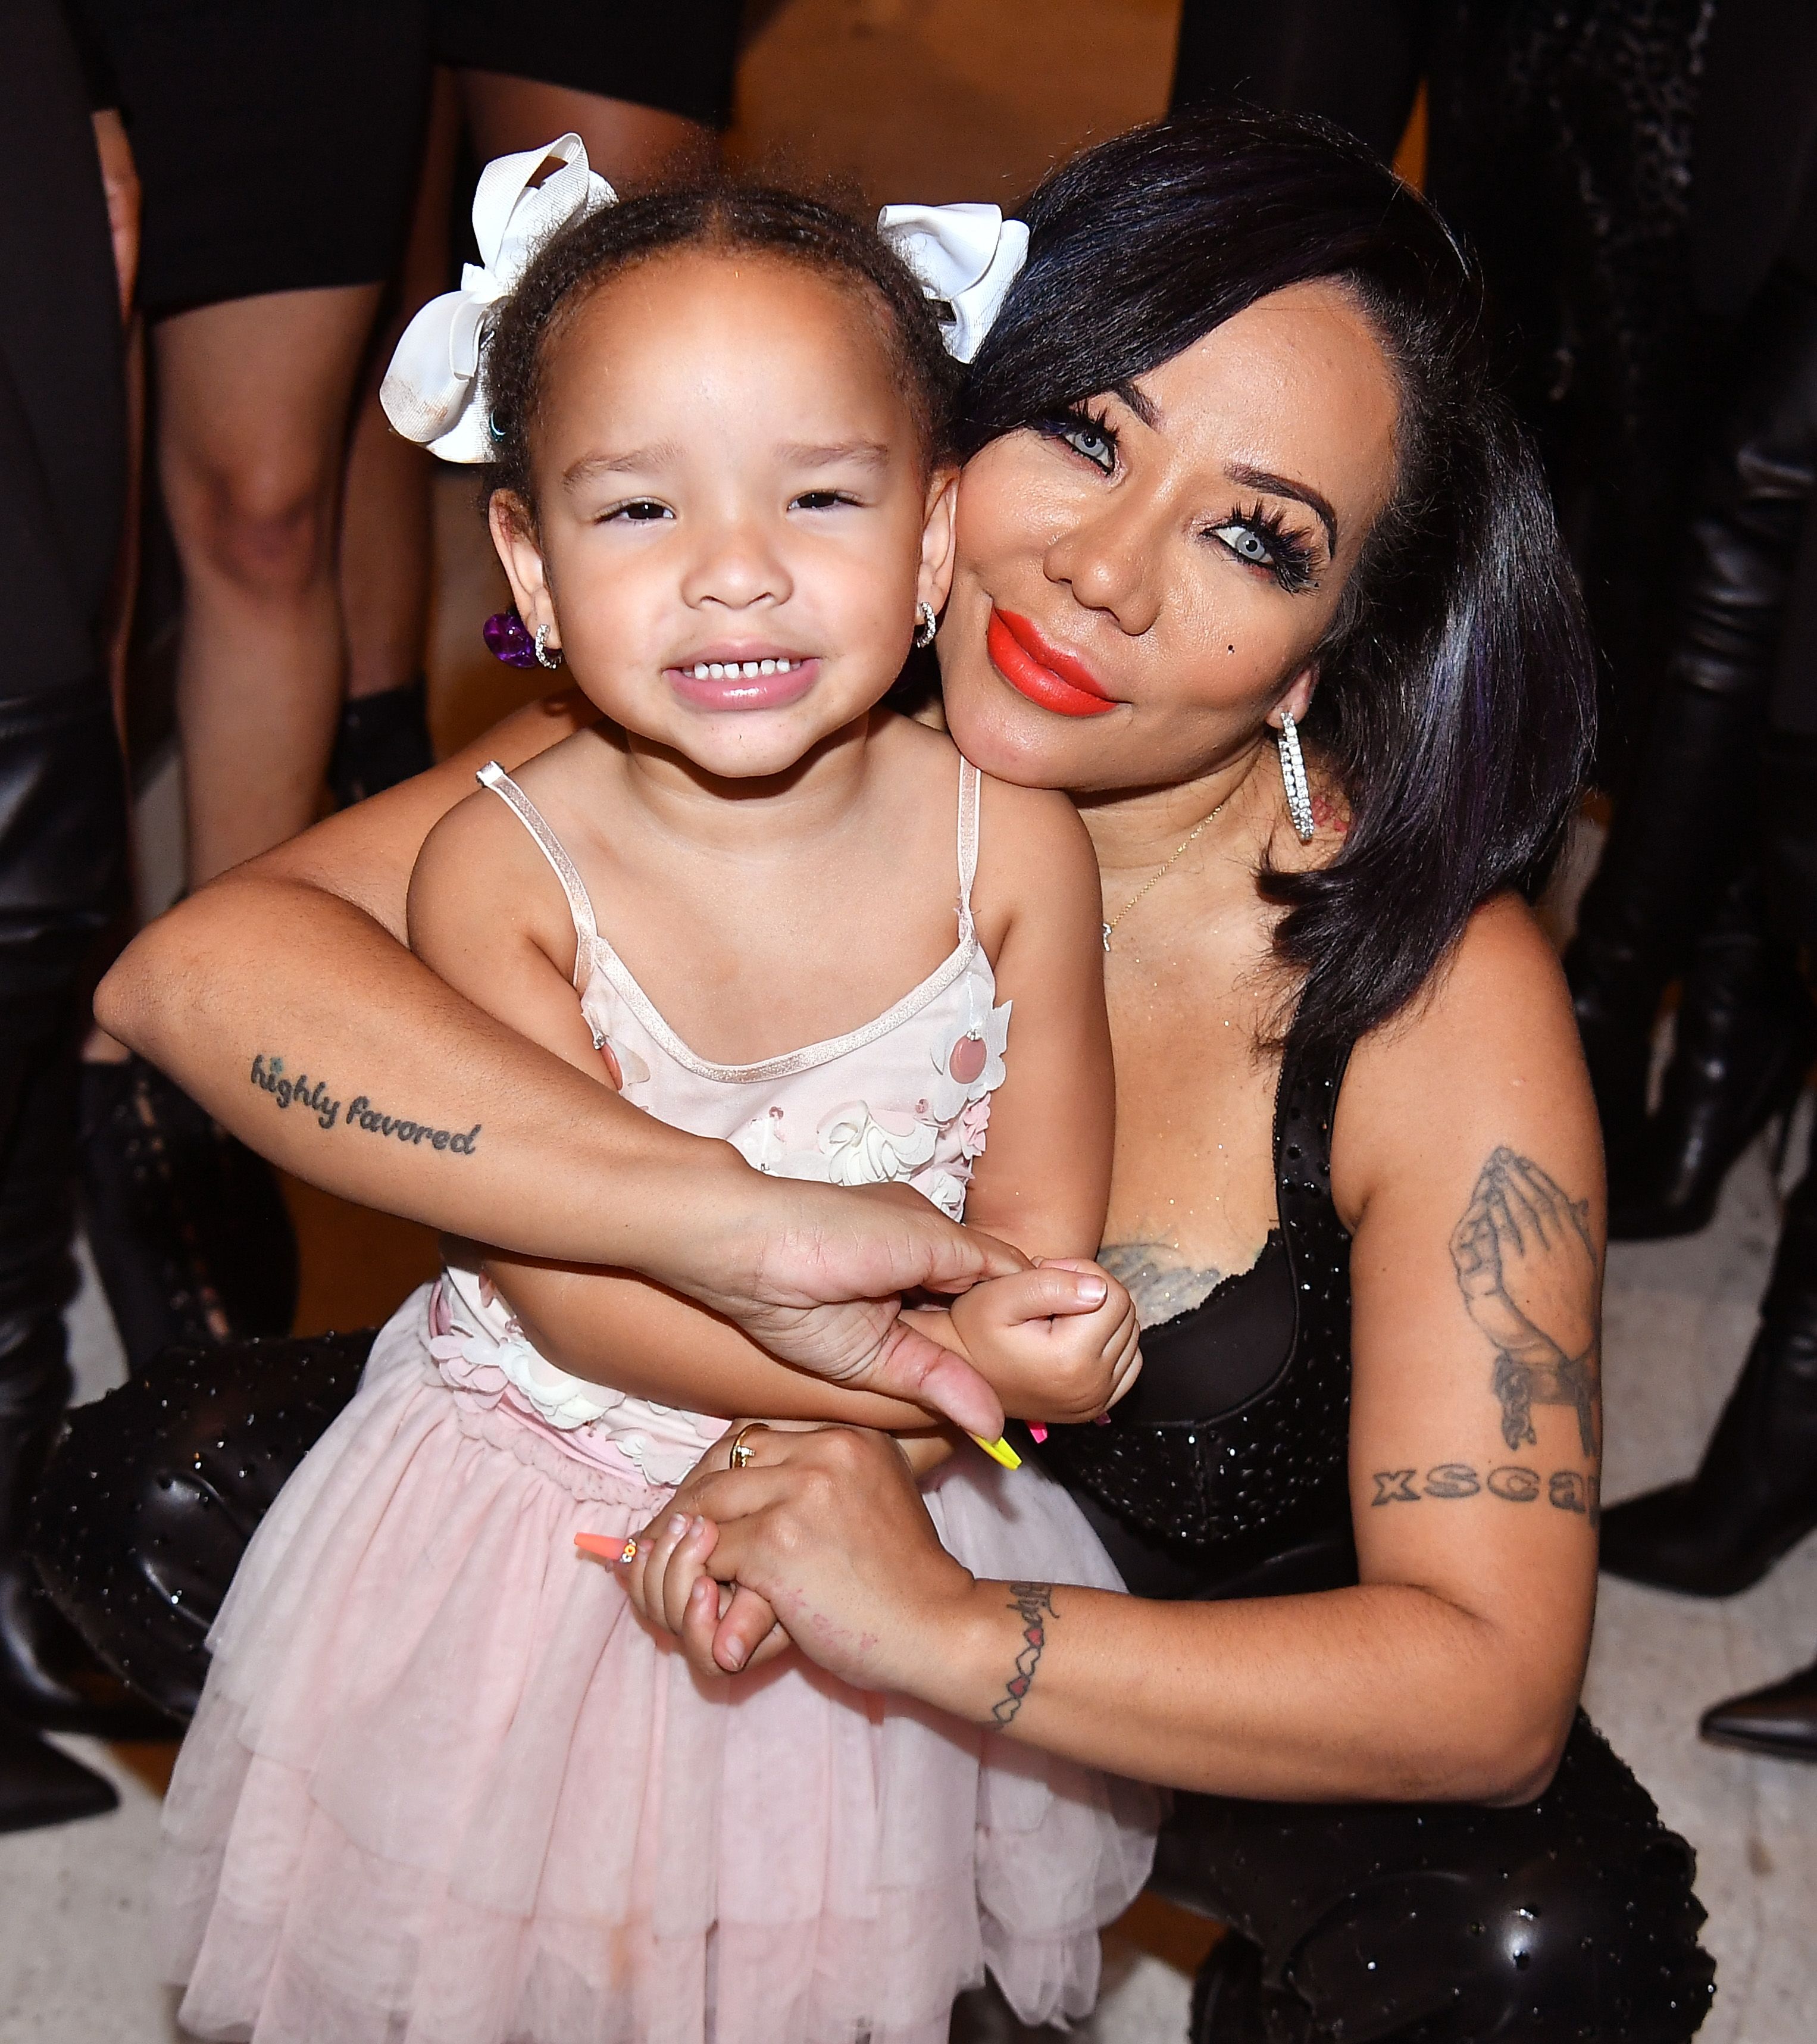 Tameka "Tiny" Harris with her daughter Heiress Diana Harris backstage during "Majic 107.5 After Dark" in 2019 in Atlanta, Georgia. | Photo: Getty Images